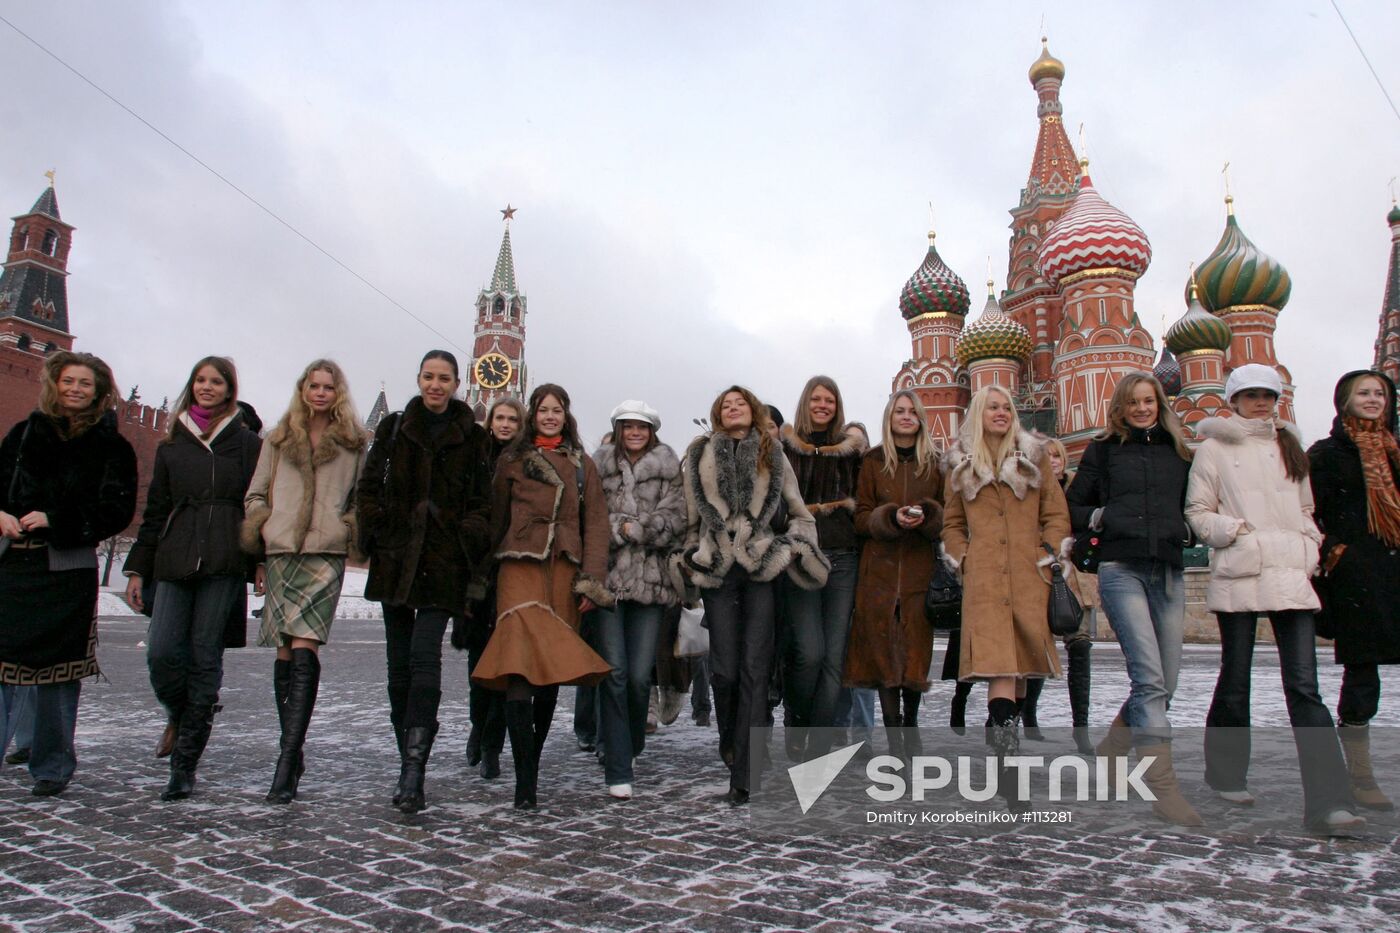 MODELS CONTEST INTERNATIONAL RED SQUARE